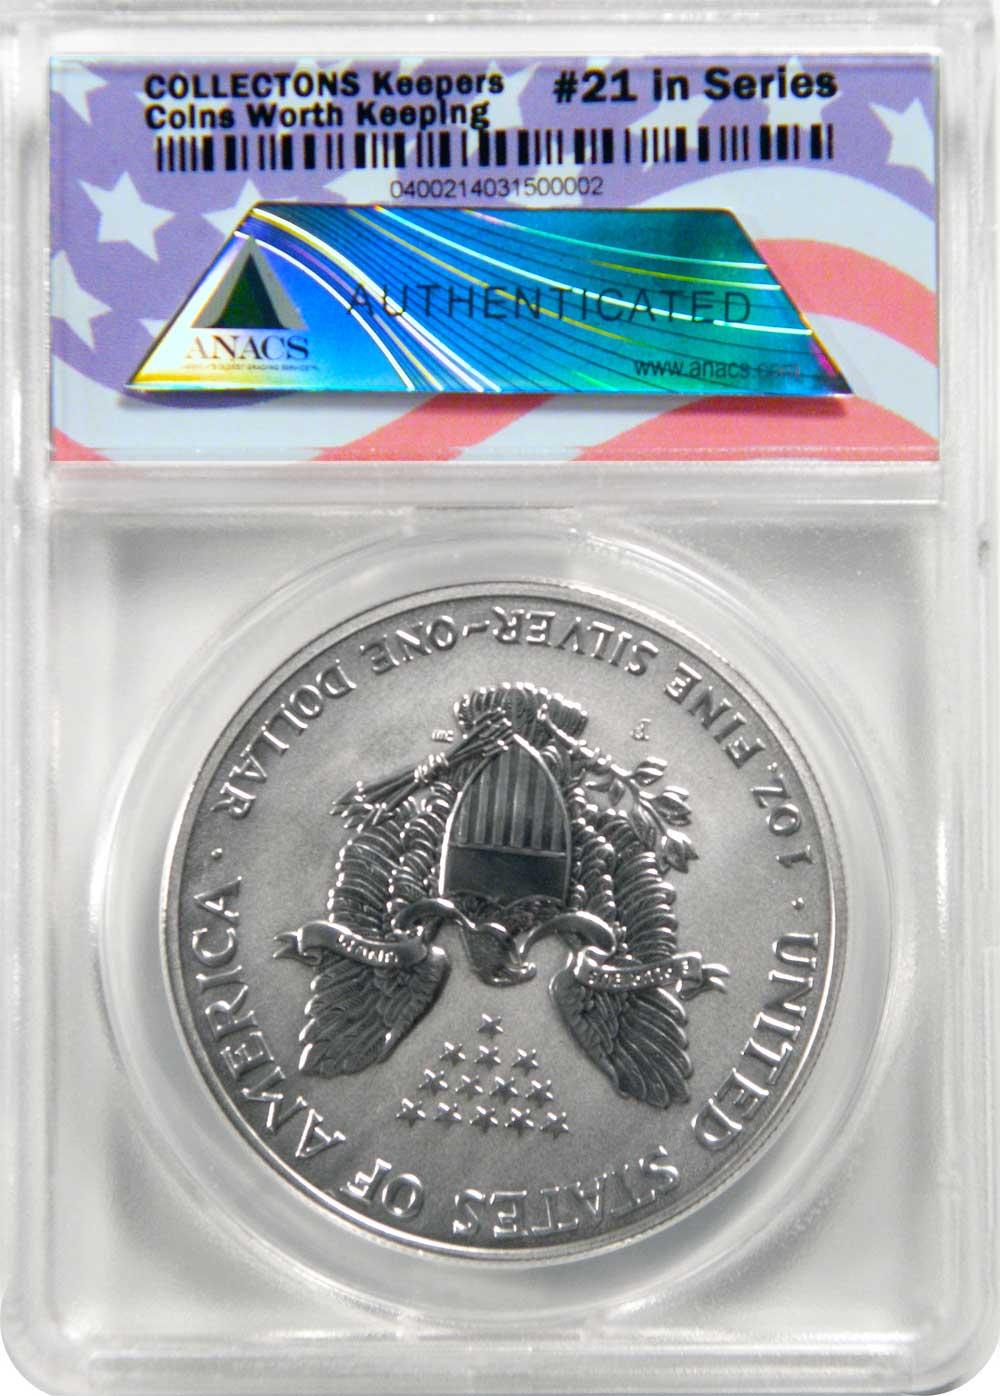 CollecTons Keepers #21: 2006-P Reverse Proof American Eagle Silver Dollar Certified in Exclusive ANACS Holder